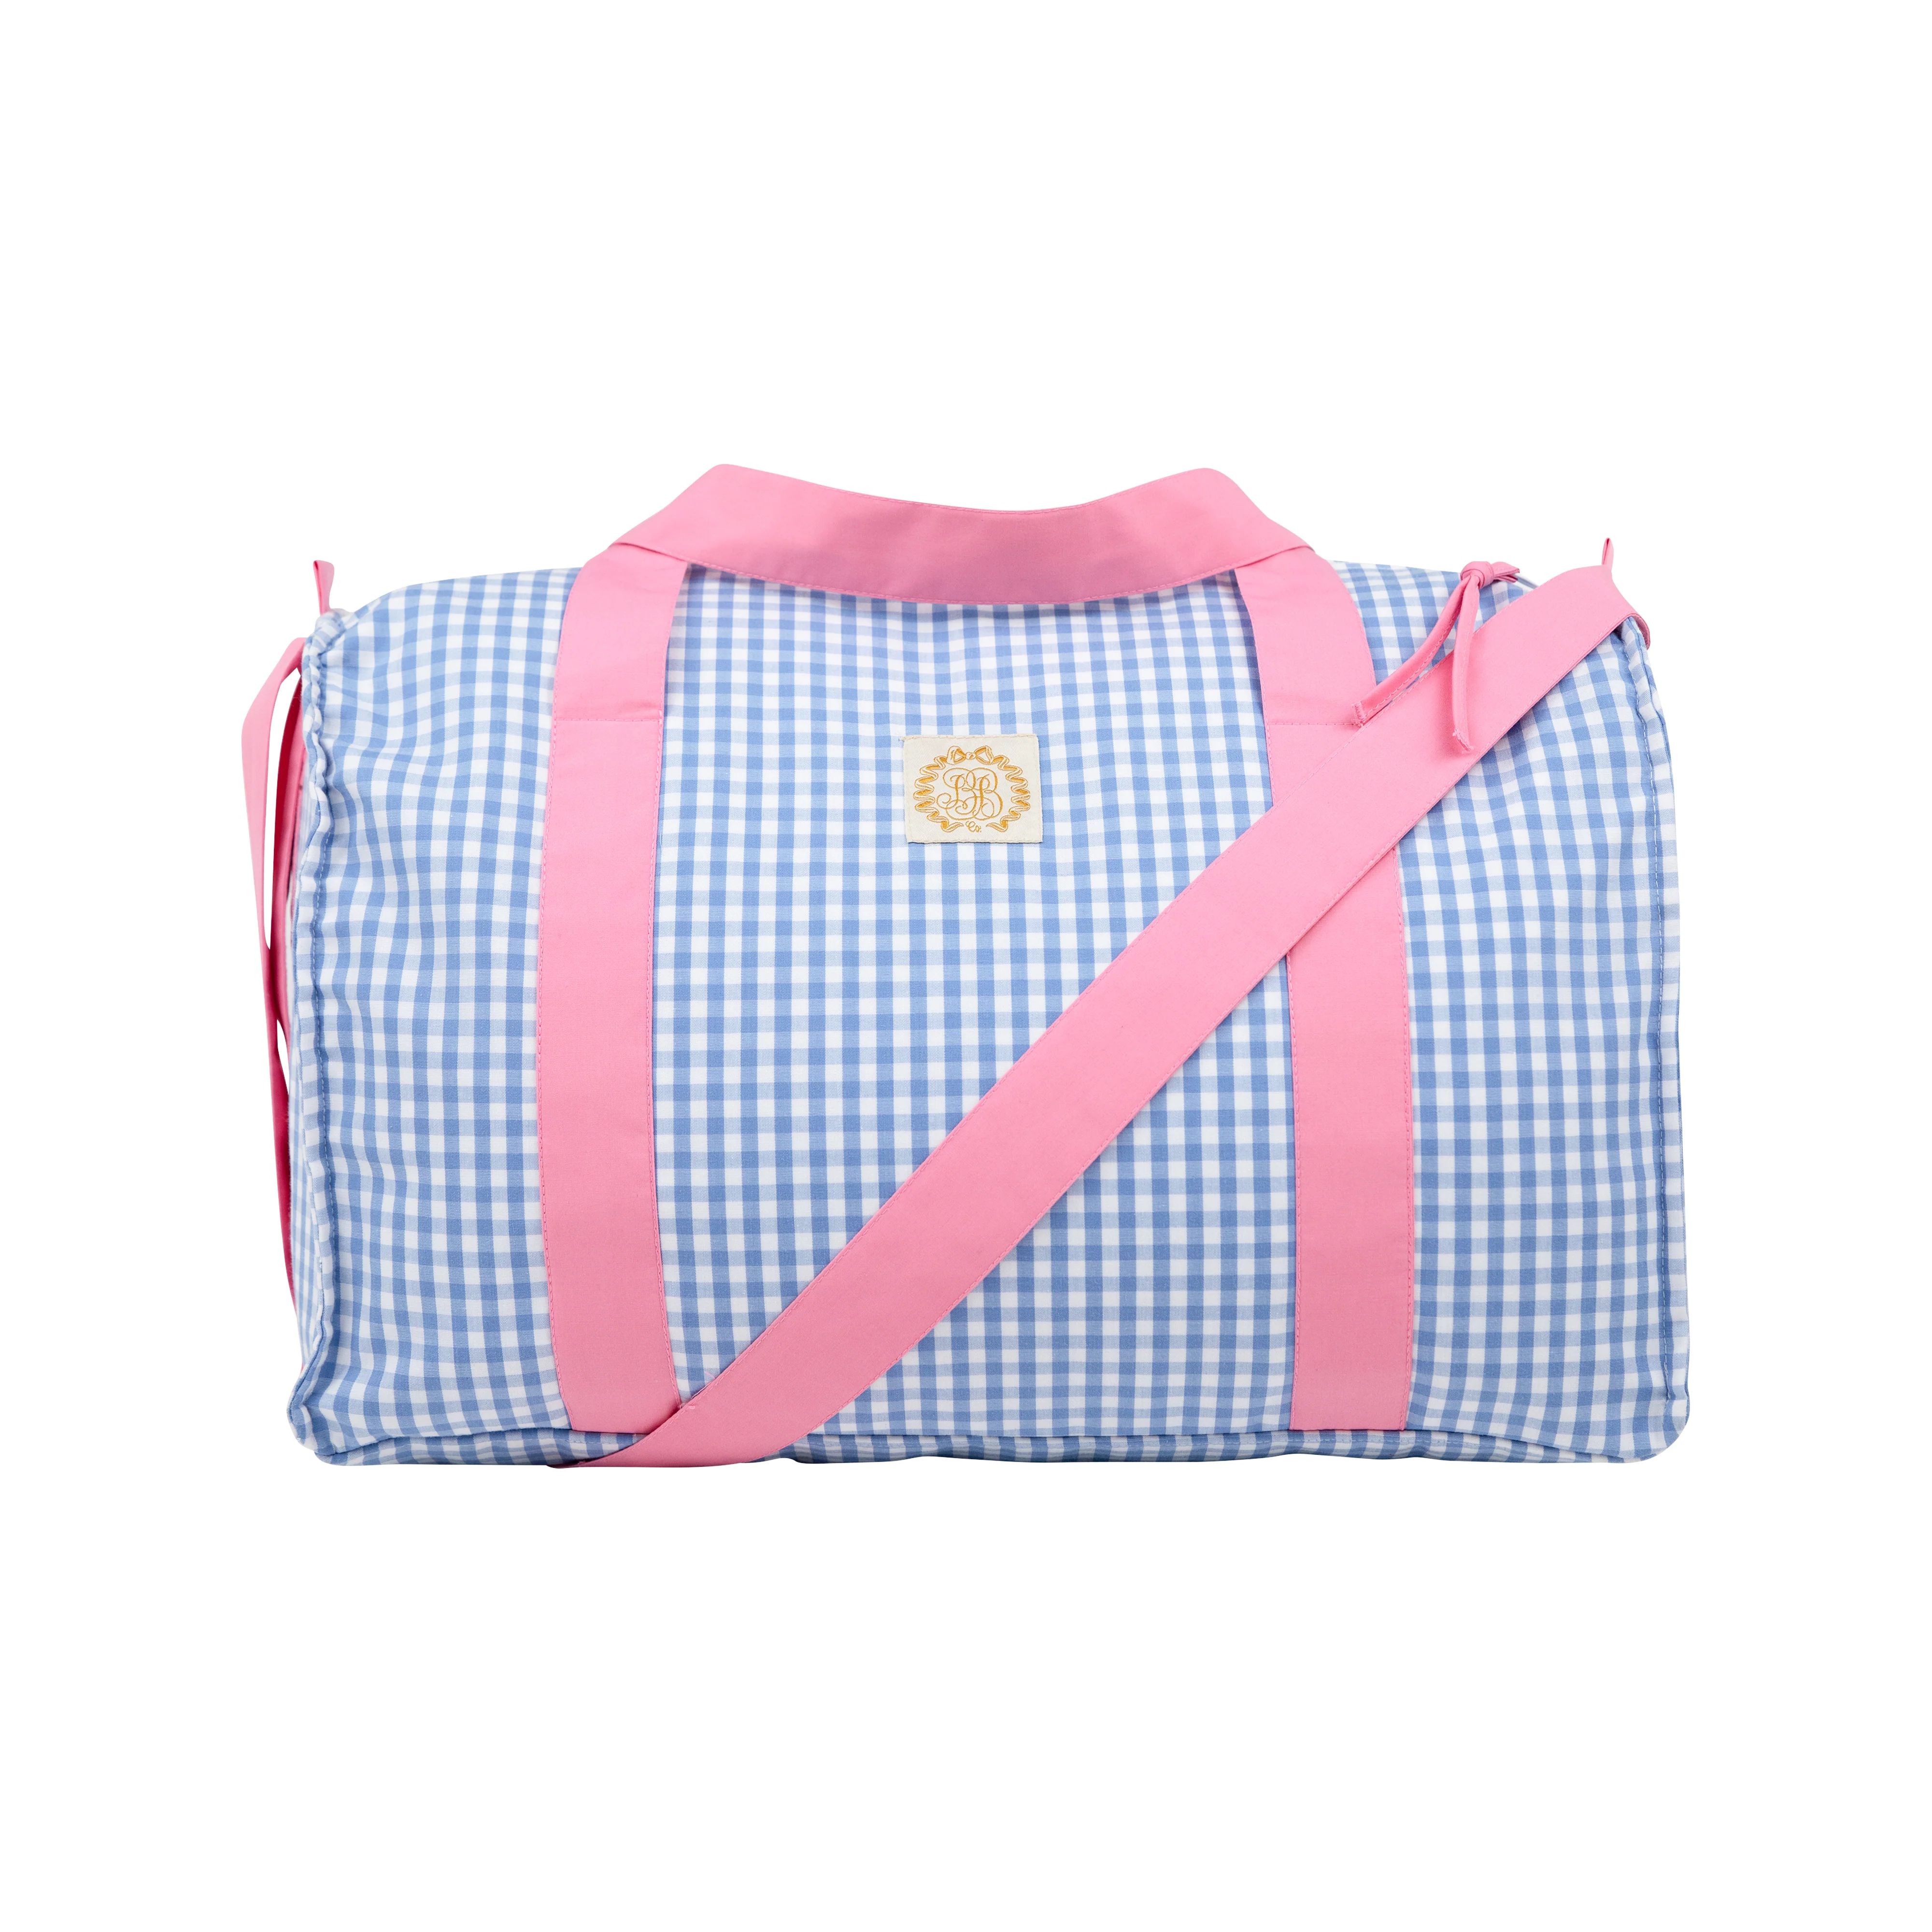 Stewart Sleepover Tote - Park City Periwinkle Check with Hamptons Hot Pink | The Beaufort Bonnet Company